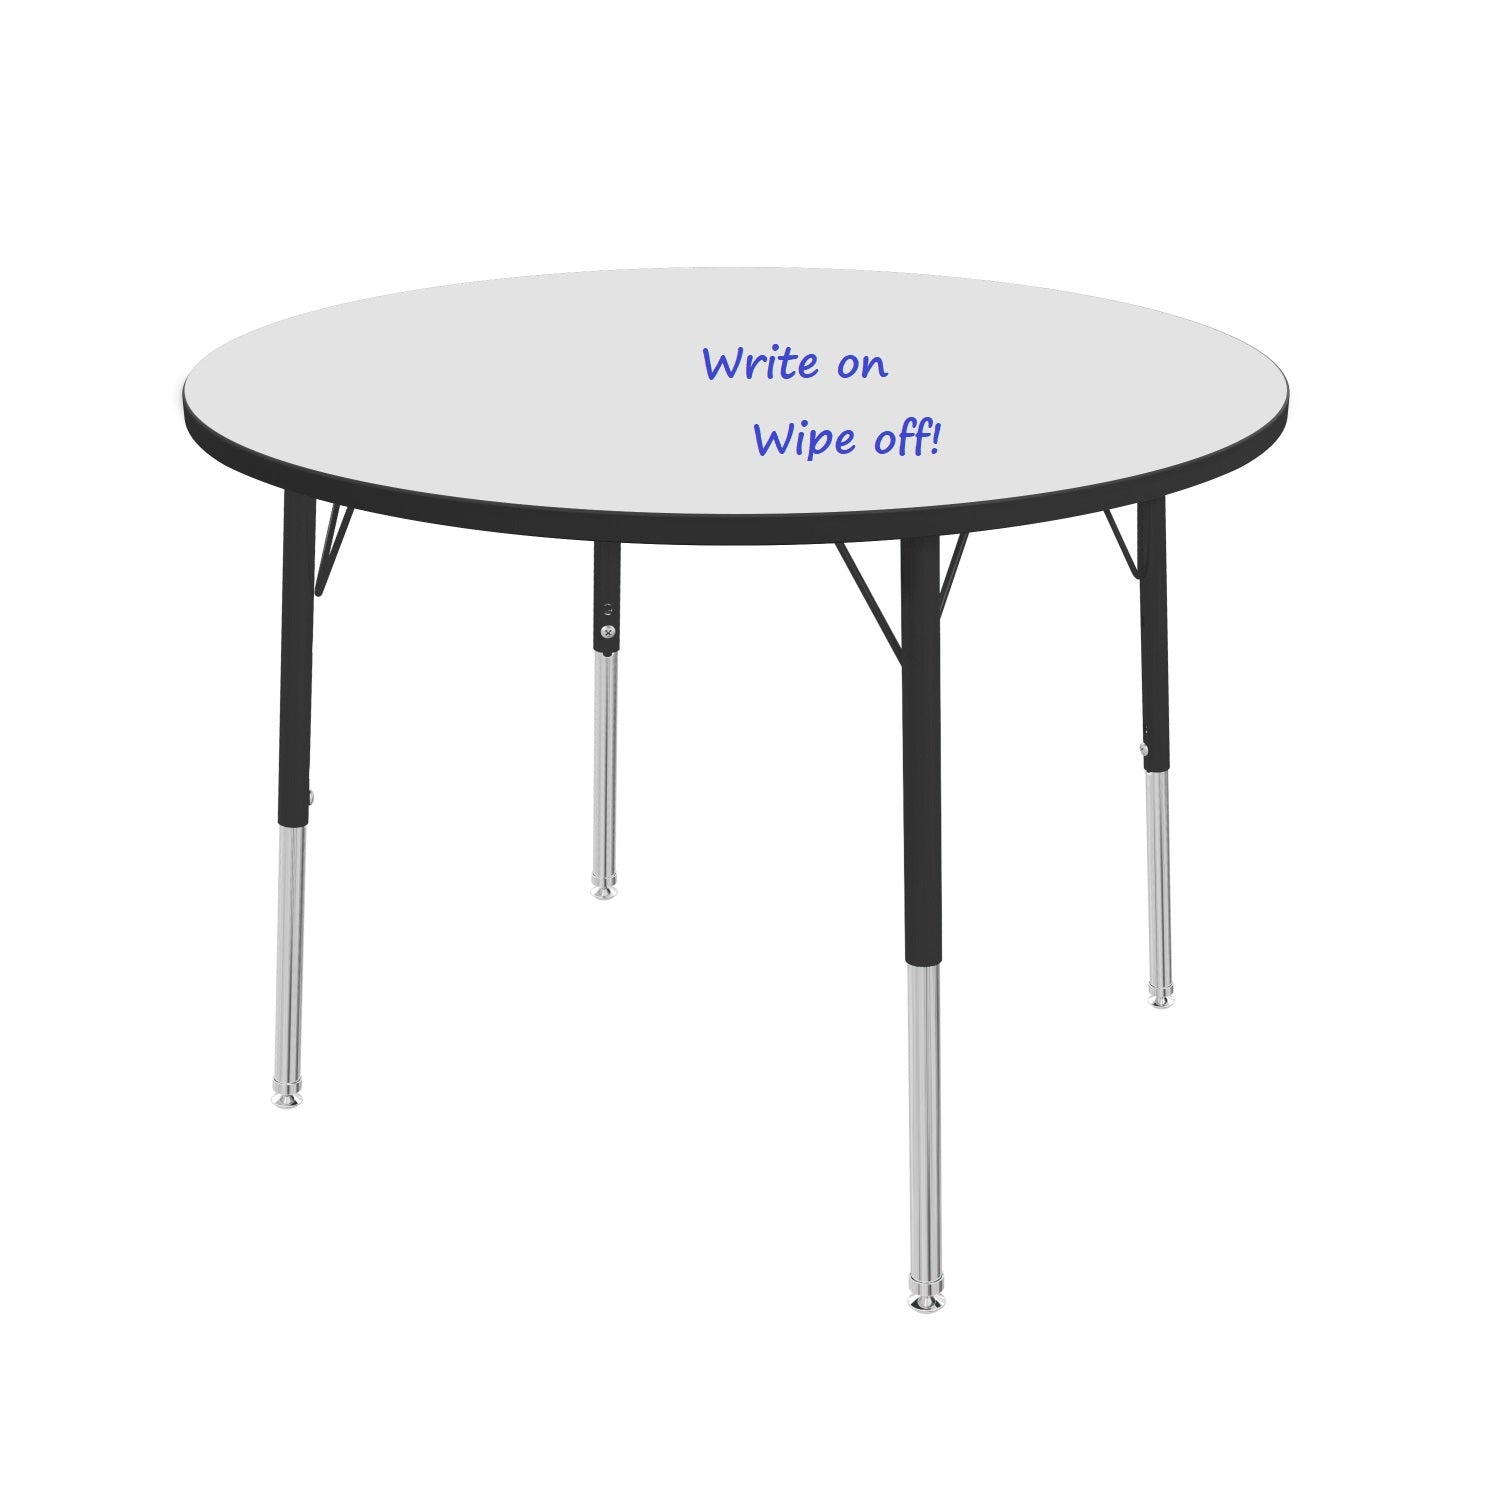 MG Series Adjustable Height Activity Table with White Dry Erase Markerboard Top, 36" Round